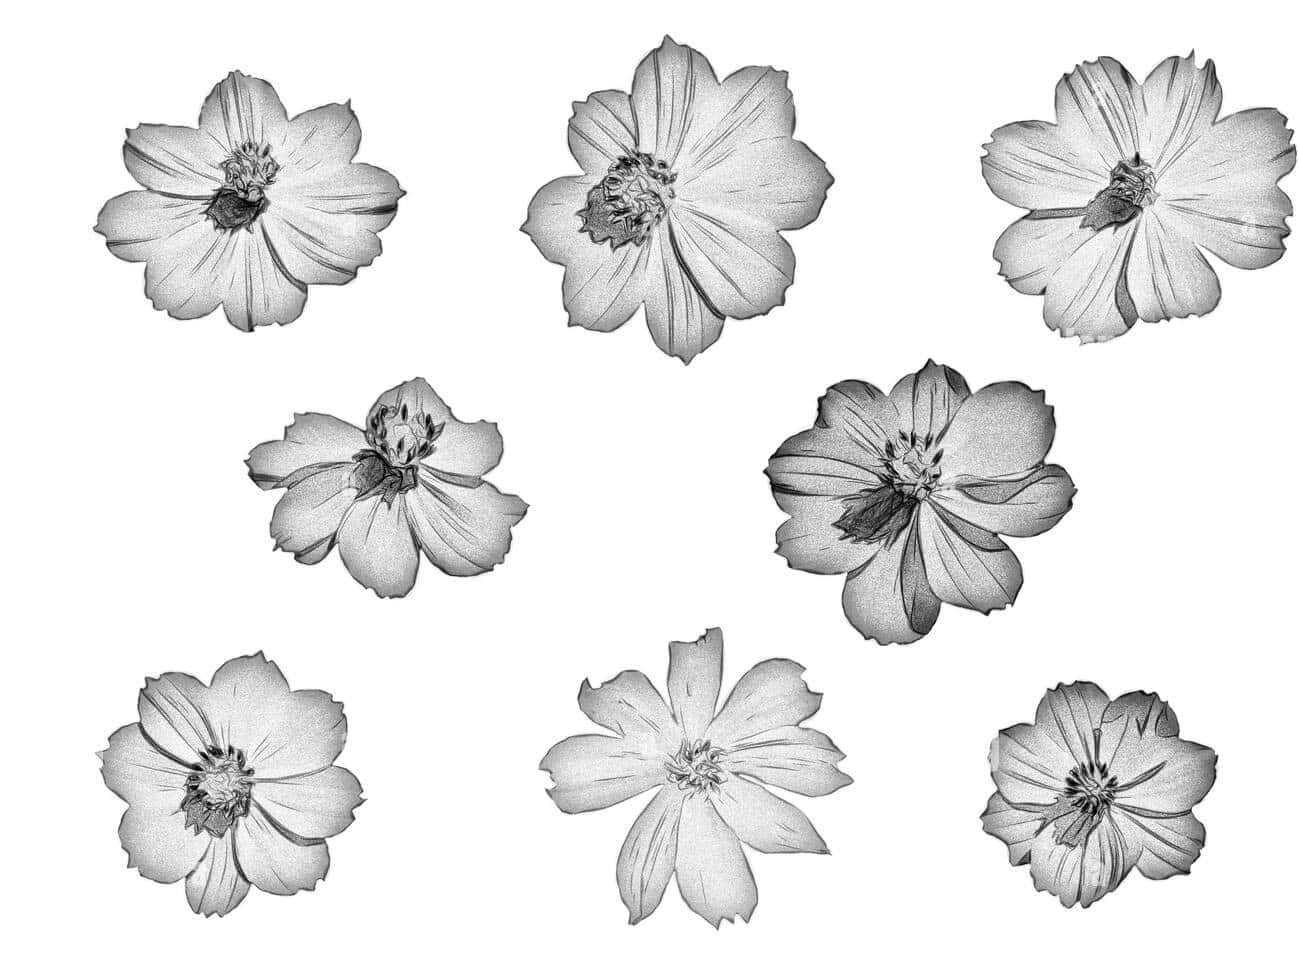 A Black And White Drawing Of Flowers